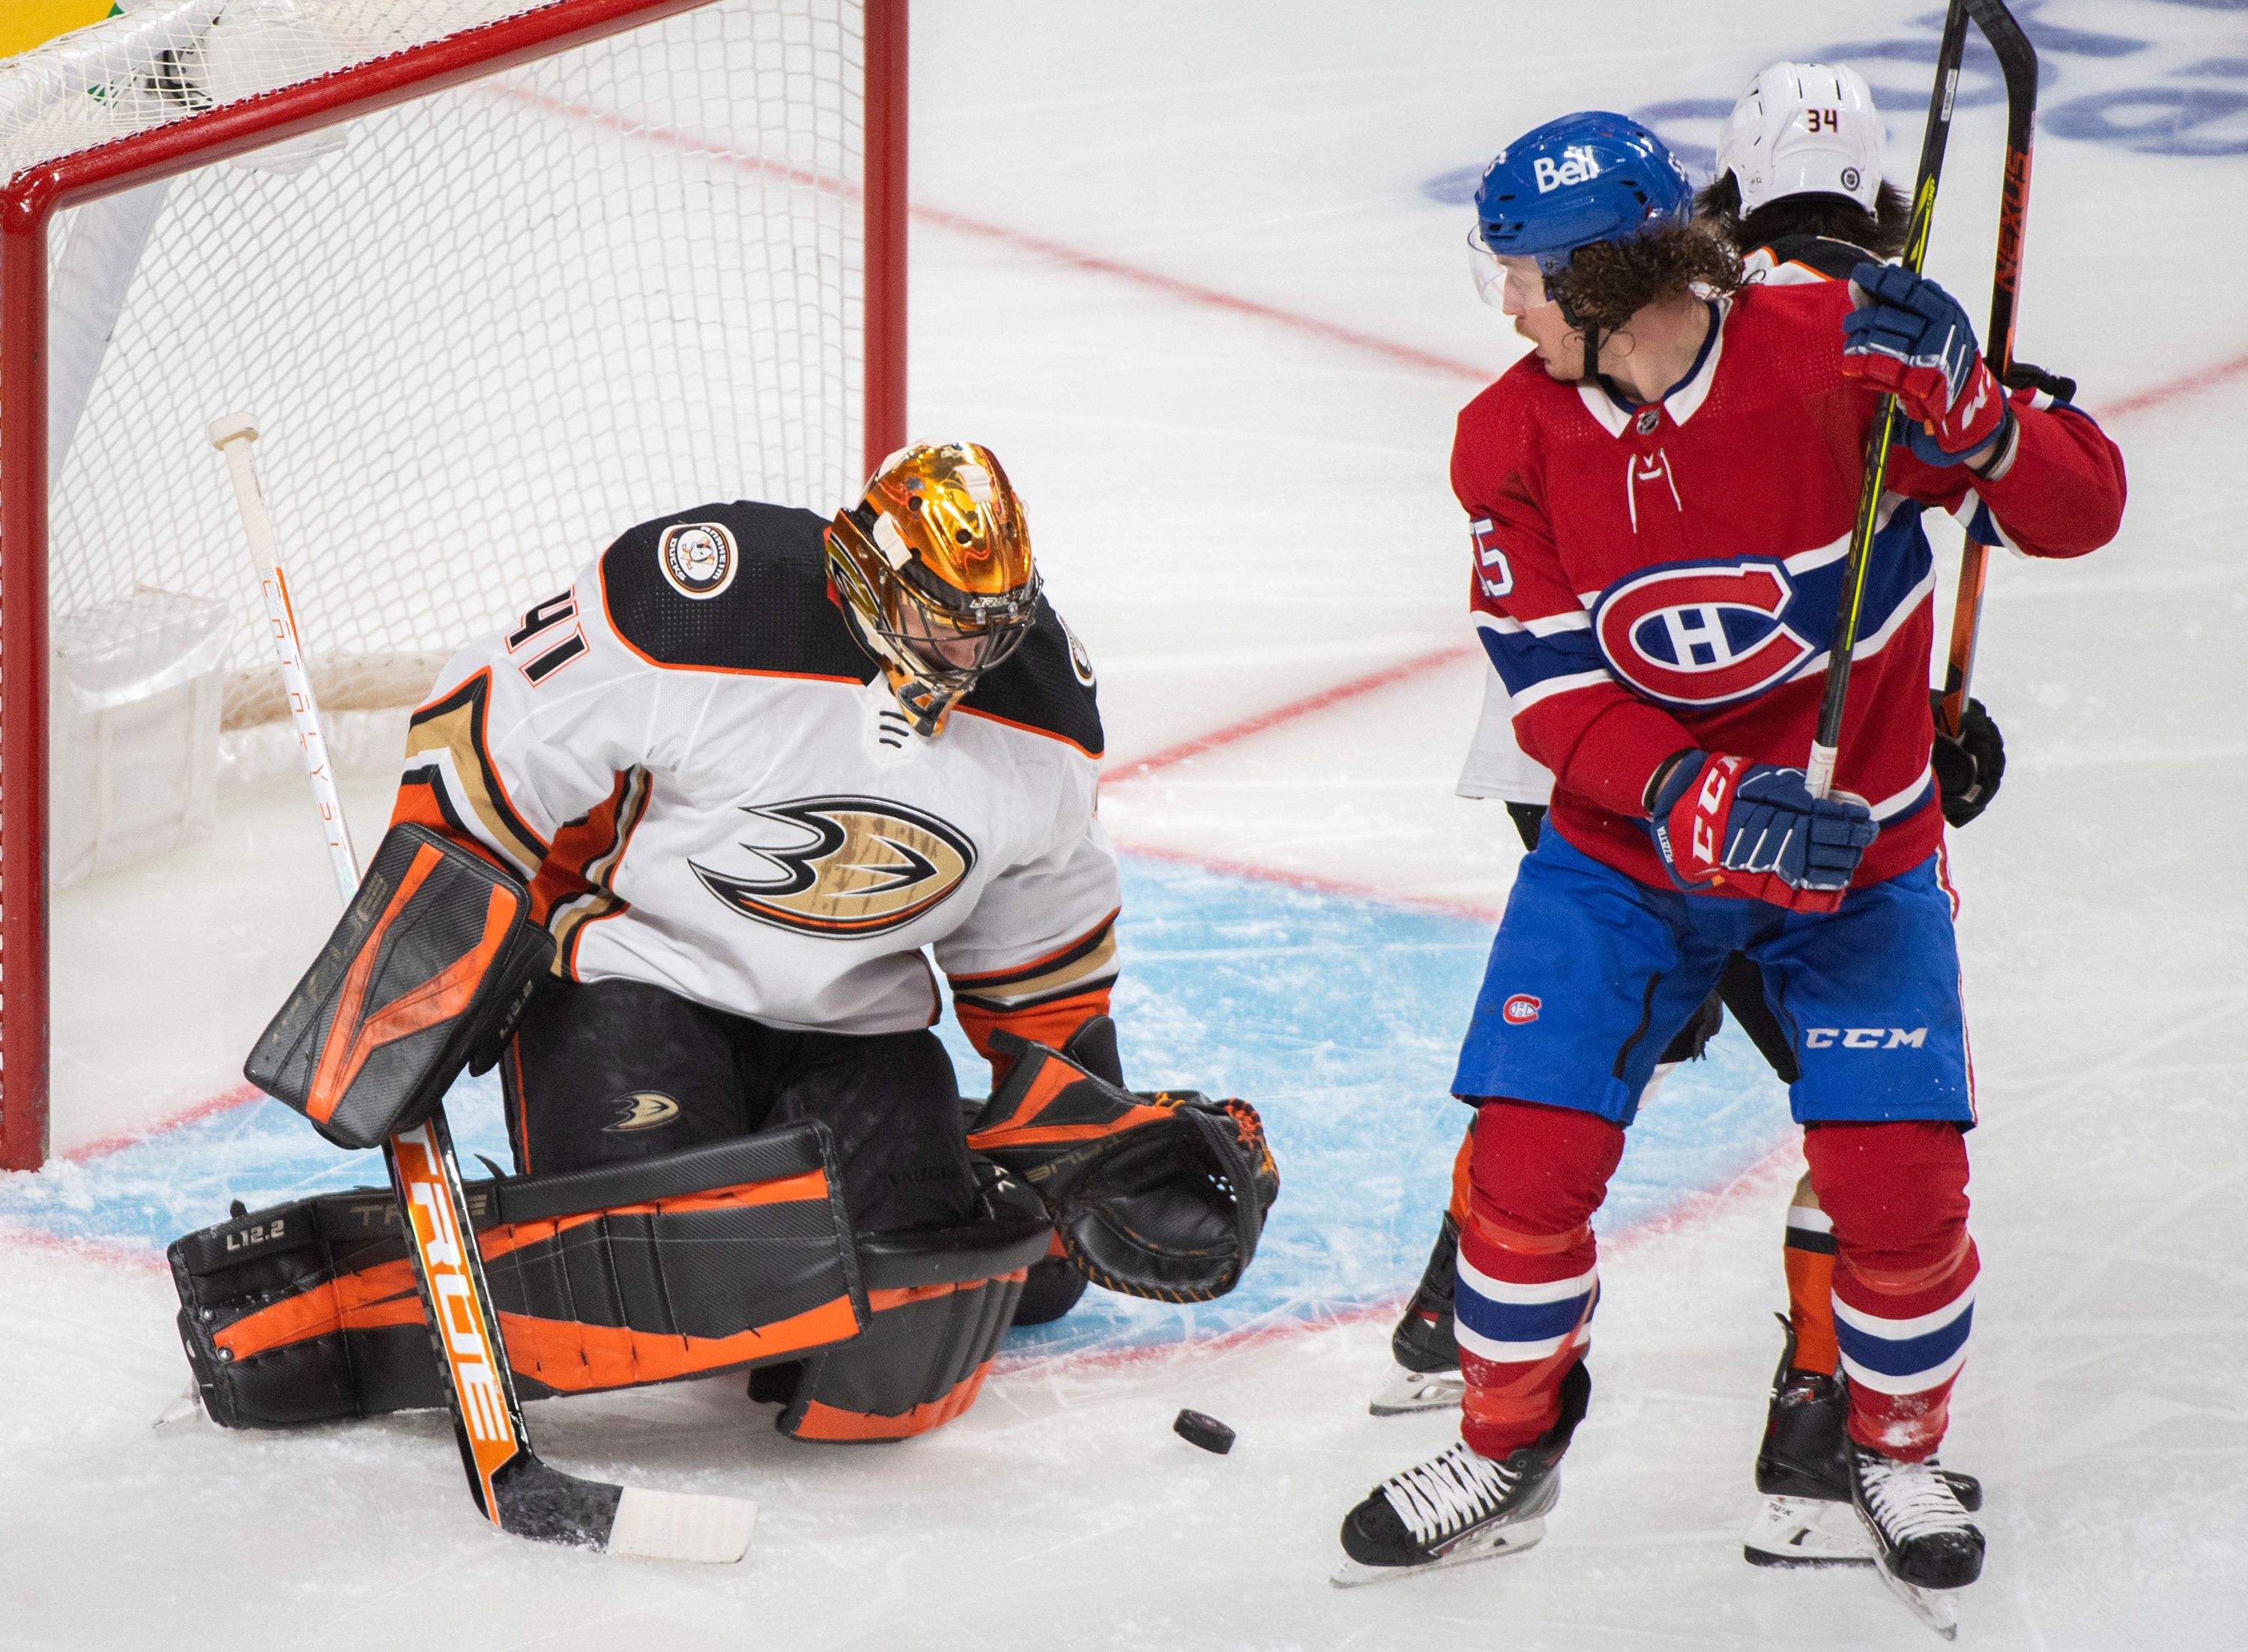 Zegras scores twice, Ducks hold off Canadiens for 5-4 win The Seattle Times